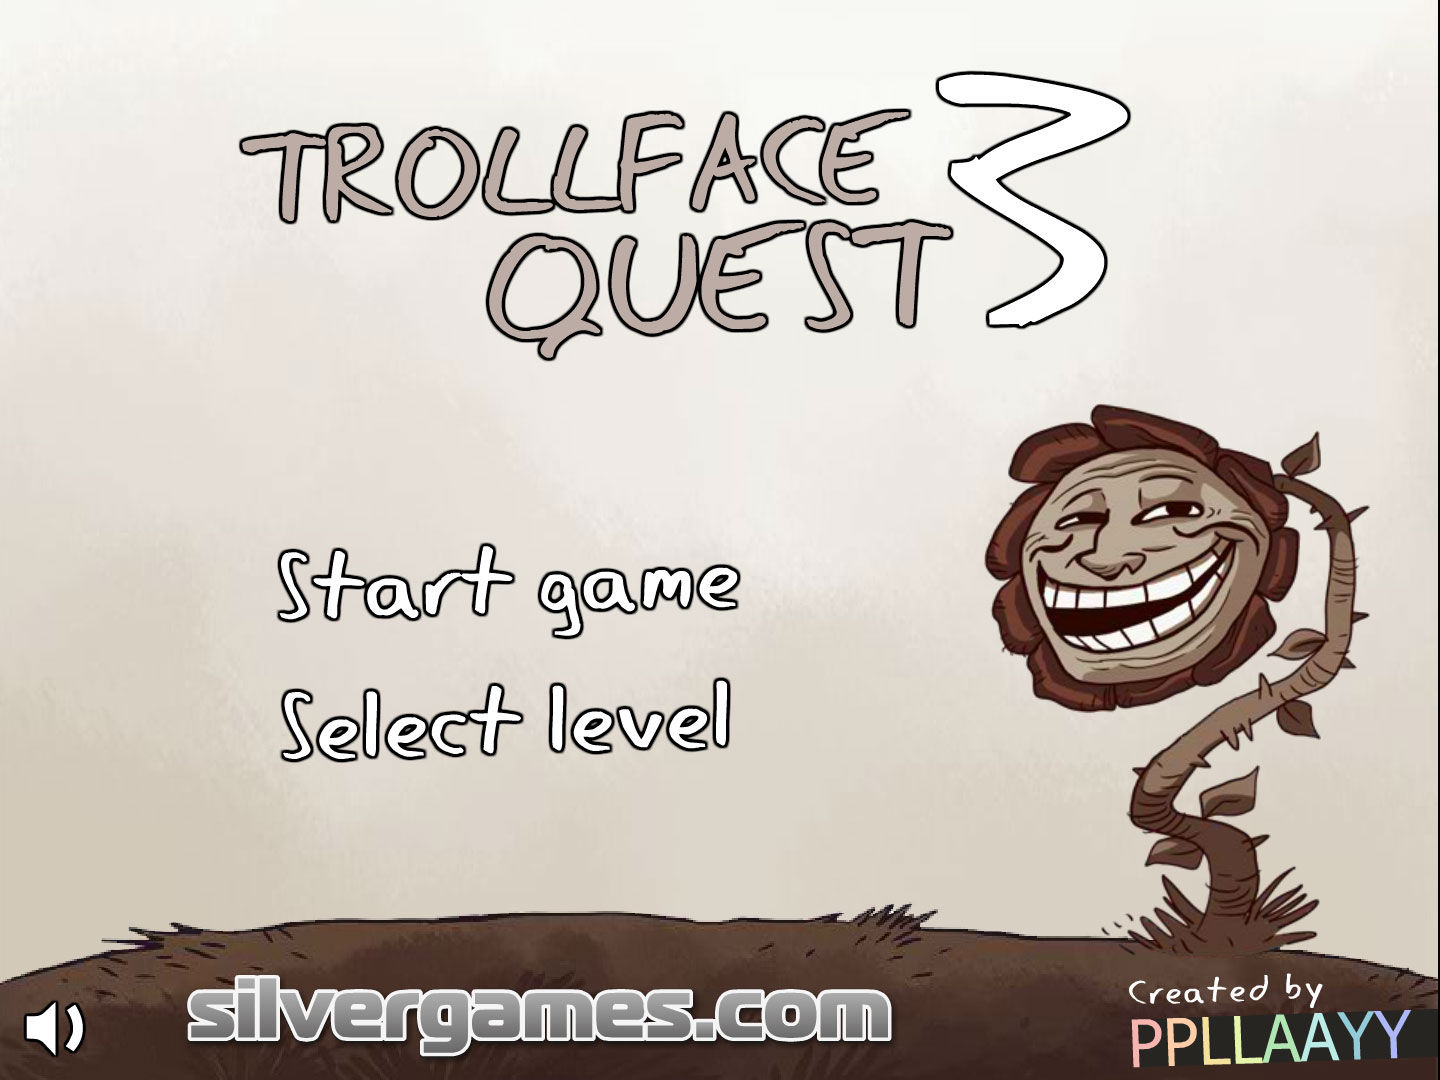 Game trollface quest. Троллфейс. Trollface игра. Игра троллфейс квест 3. Troll face Quest.